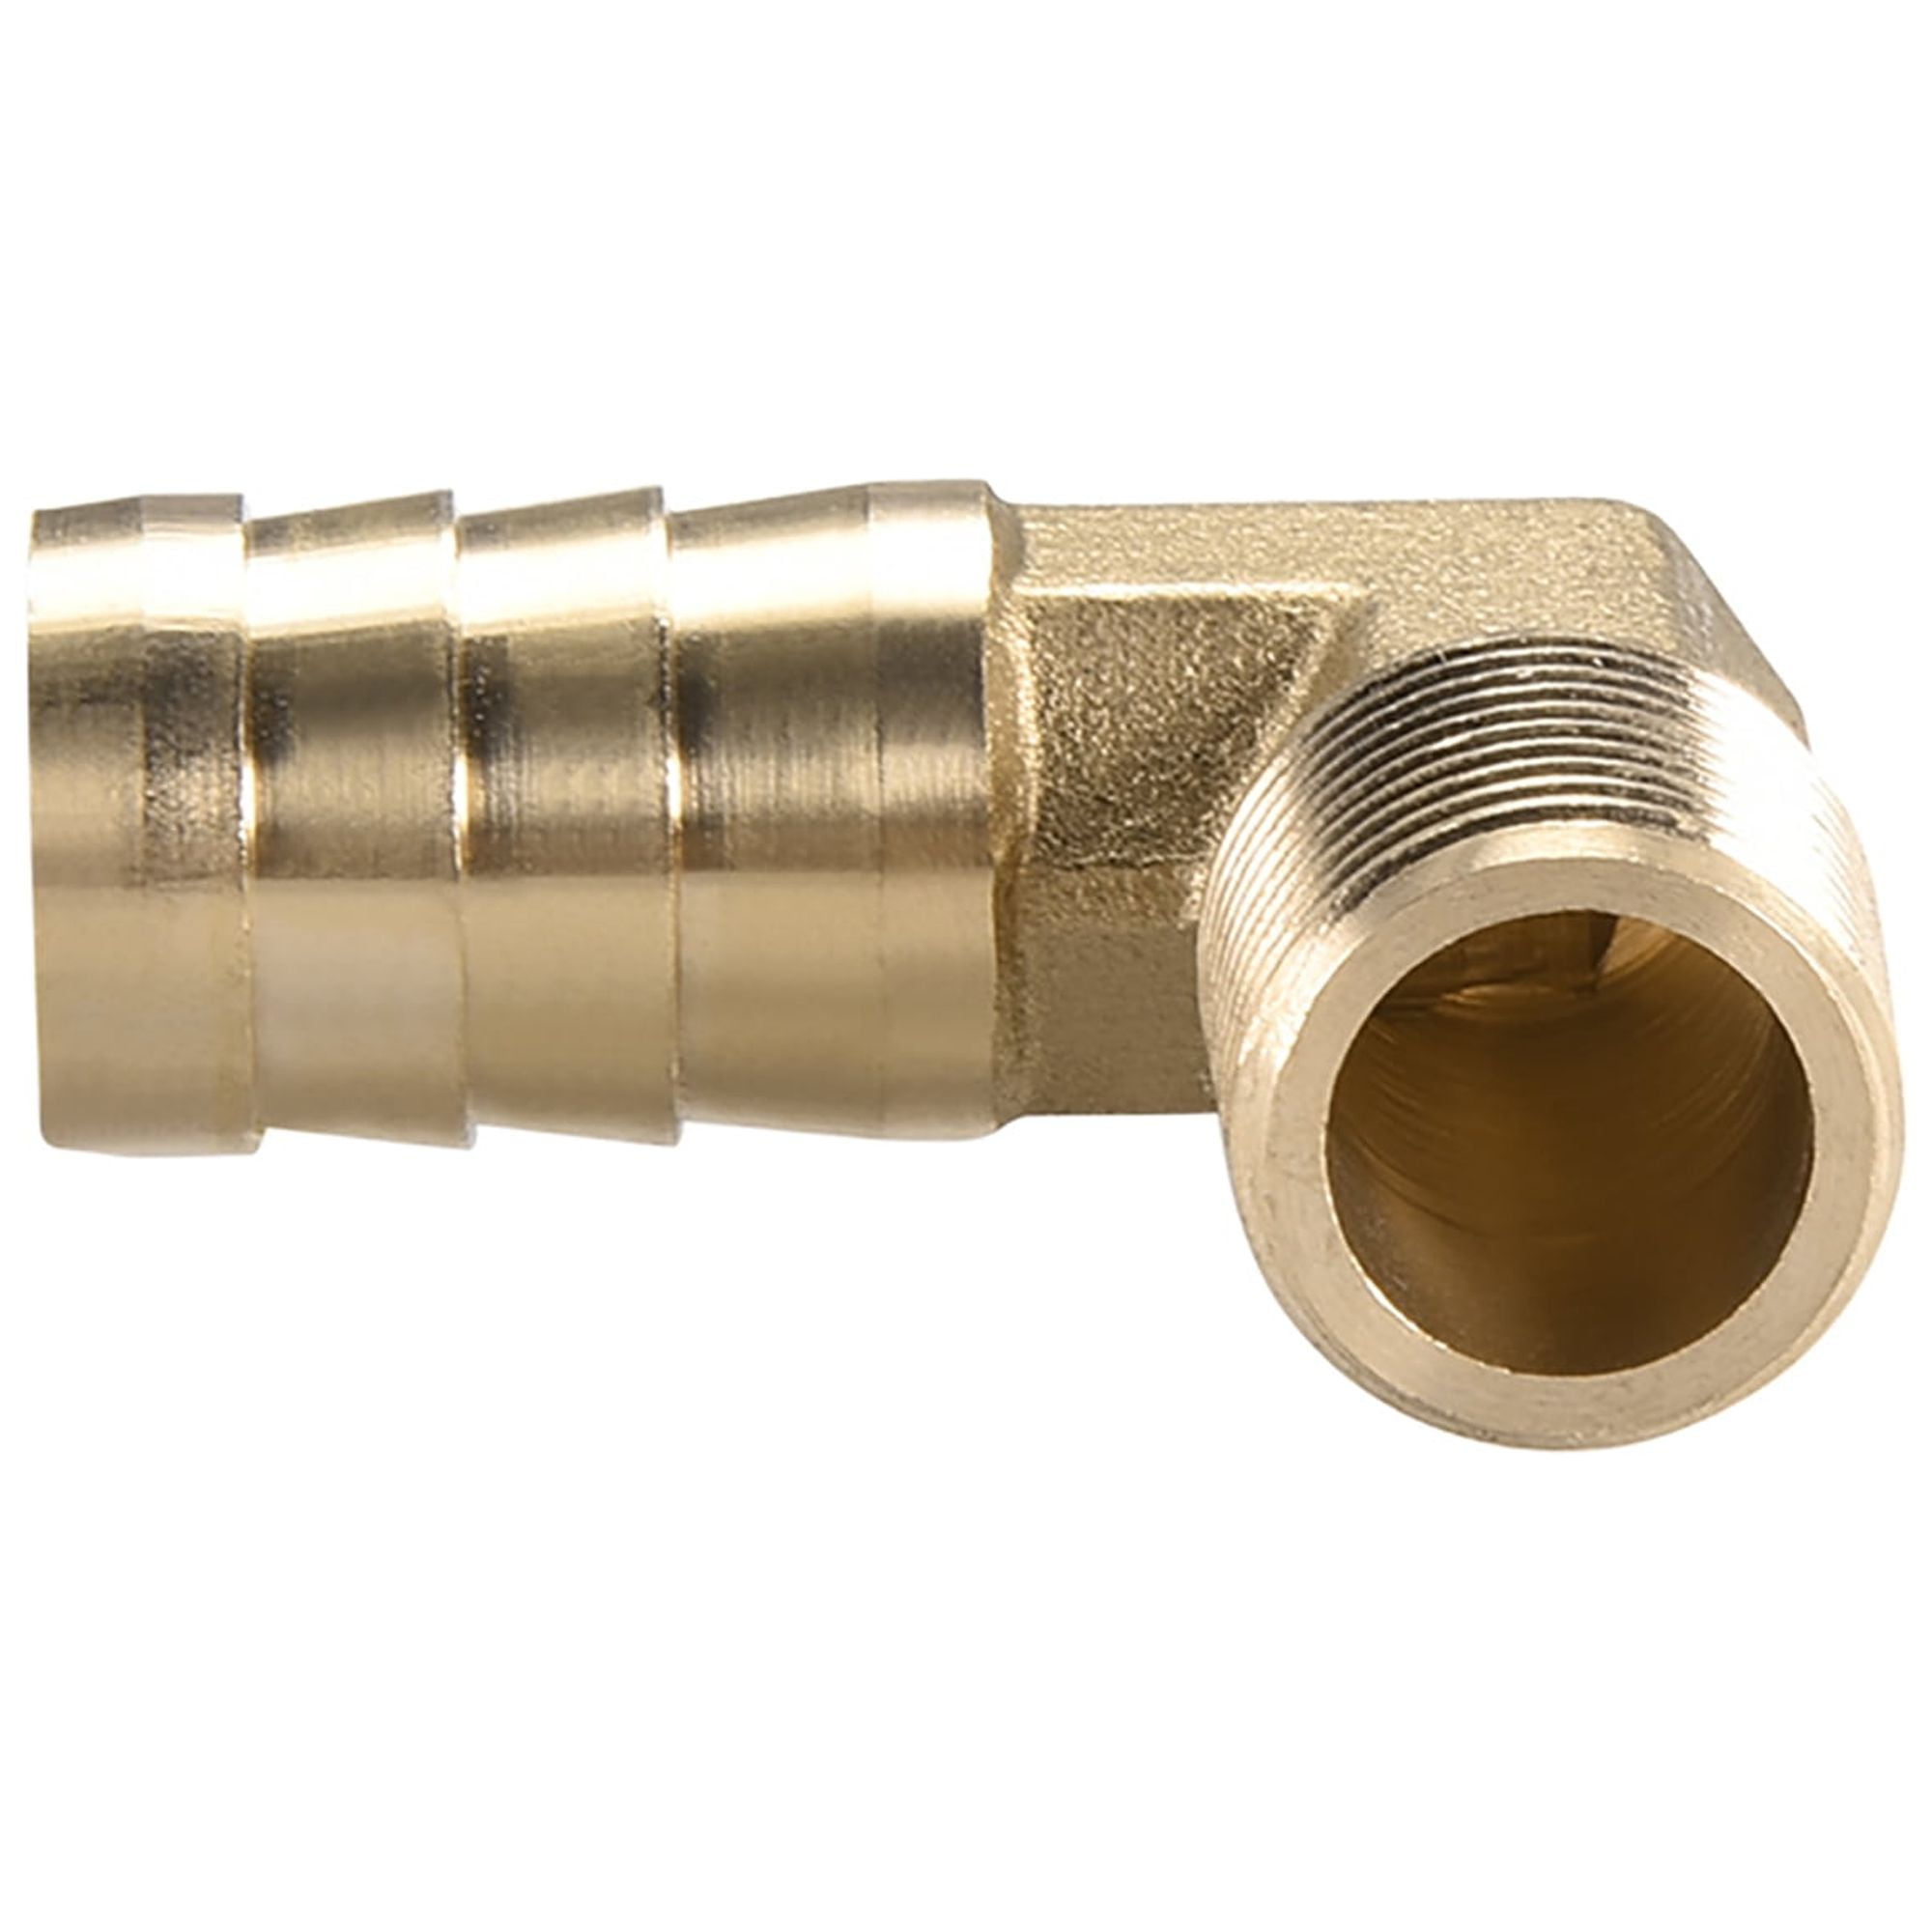 Metalwork Brass Hose Barb Fitting, 90 Degree Elbow, 3/8 x 3/8 Barbed  (Pack of 2)